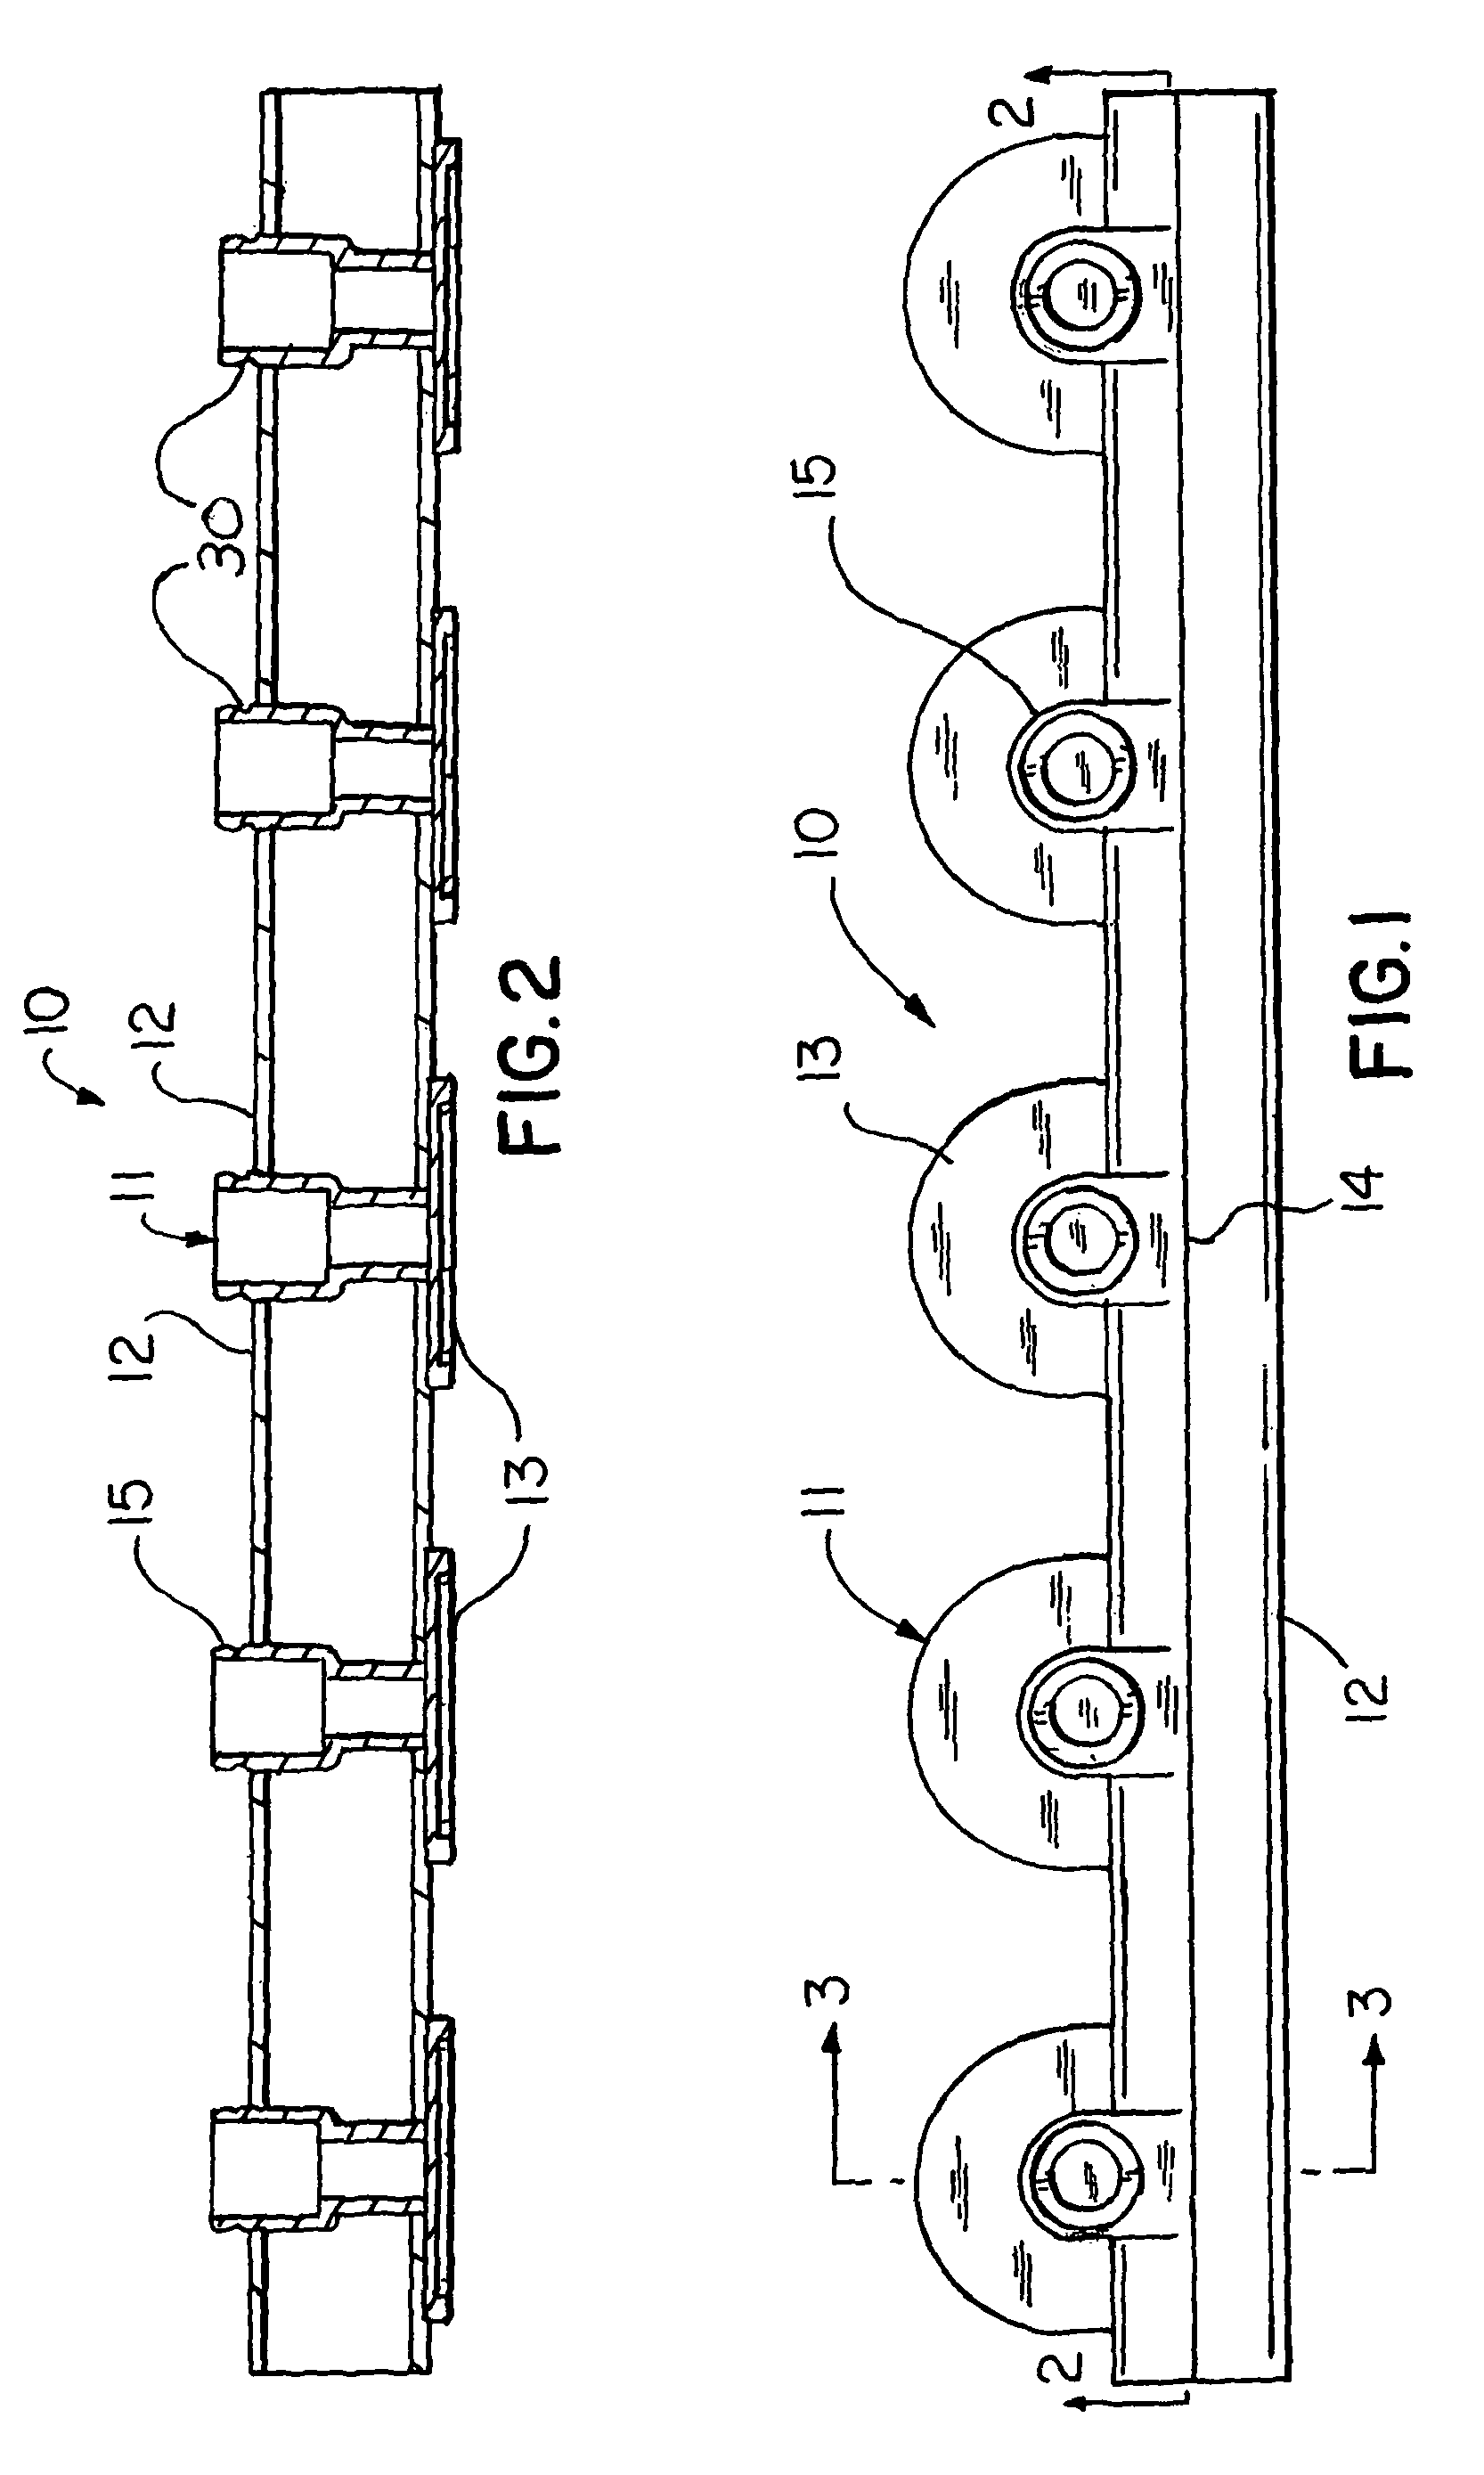 Air injector system apparatus and methods for a tub or spa